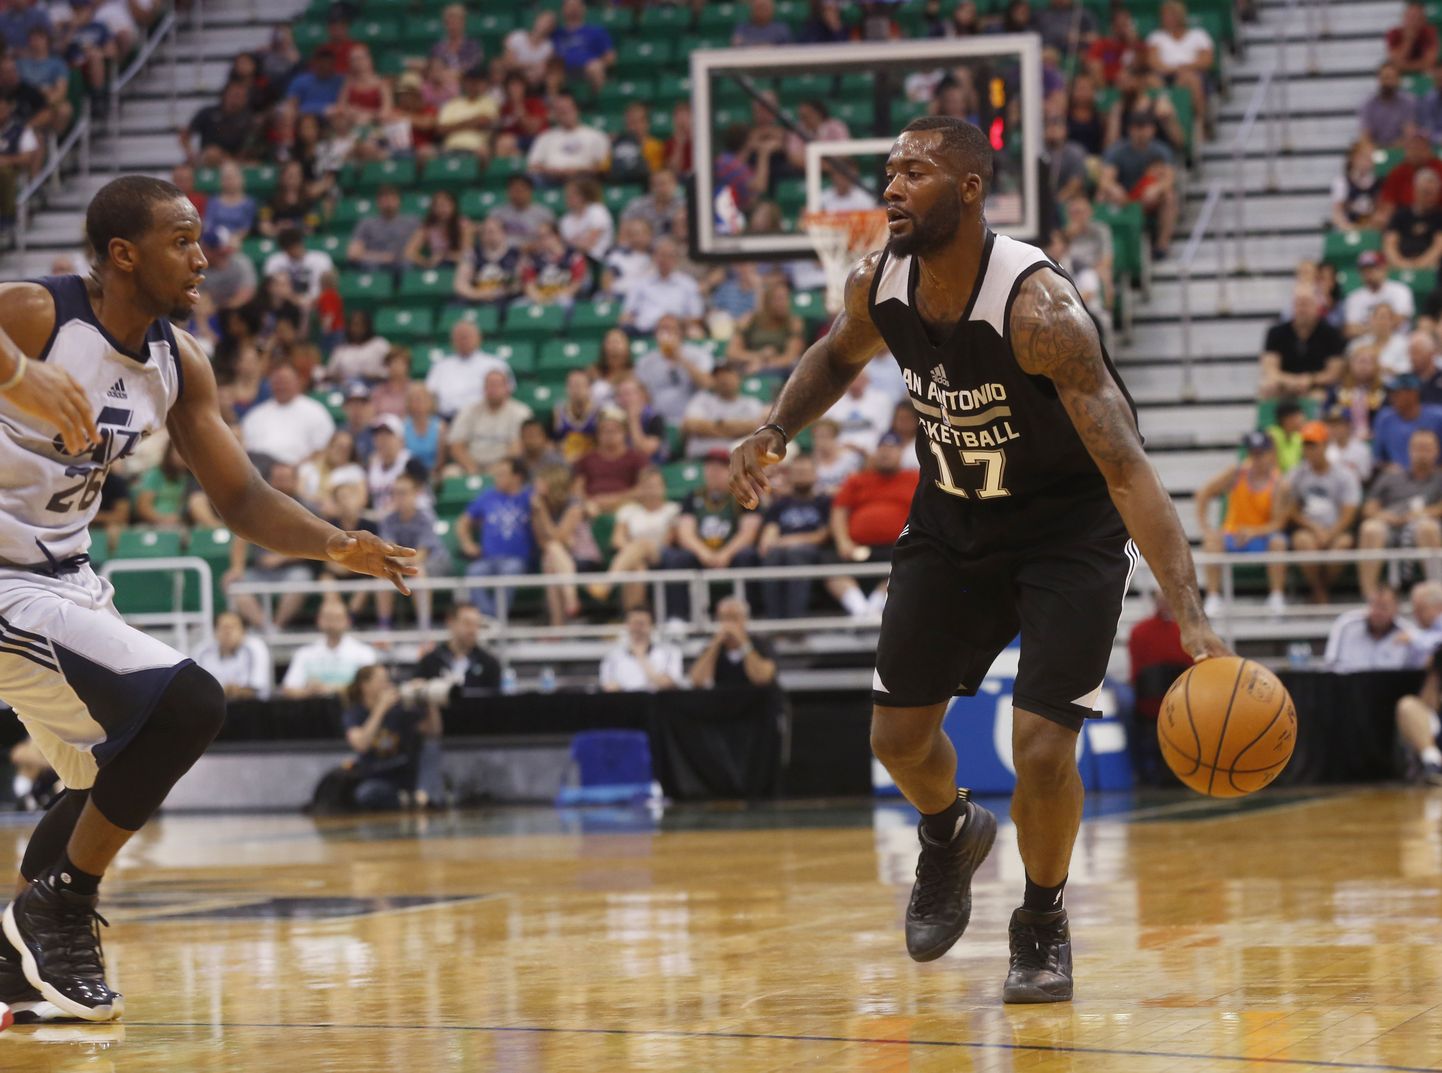 San Antonio Spurs' Jonathan Simmons (17) dribbles down the court as Utah Jazz's Dionte Christmas (26) defends during the first half of an NBA Summer League basketball game Monday, July 4, 2016, in Salt Lake City. (AP Photo/Kim Raff)